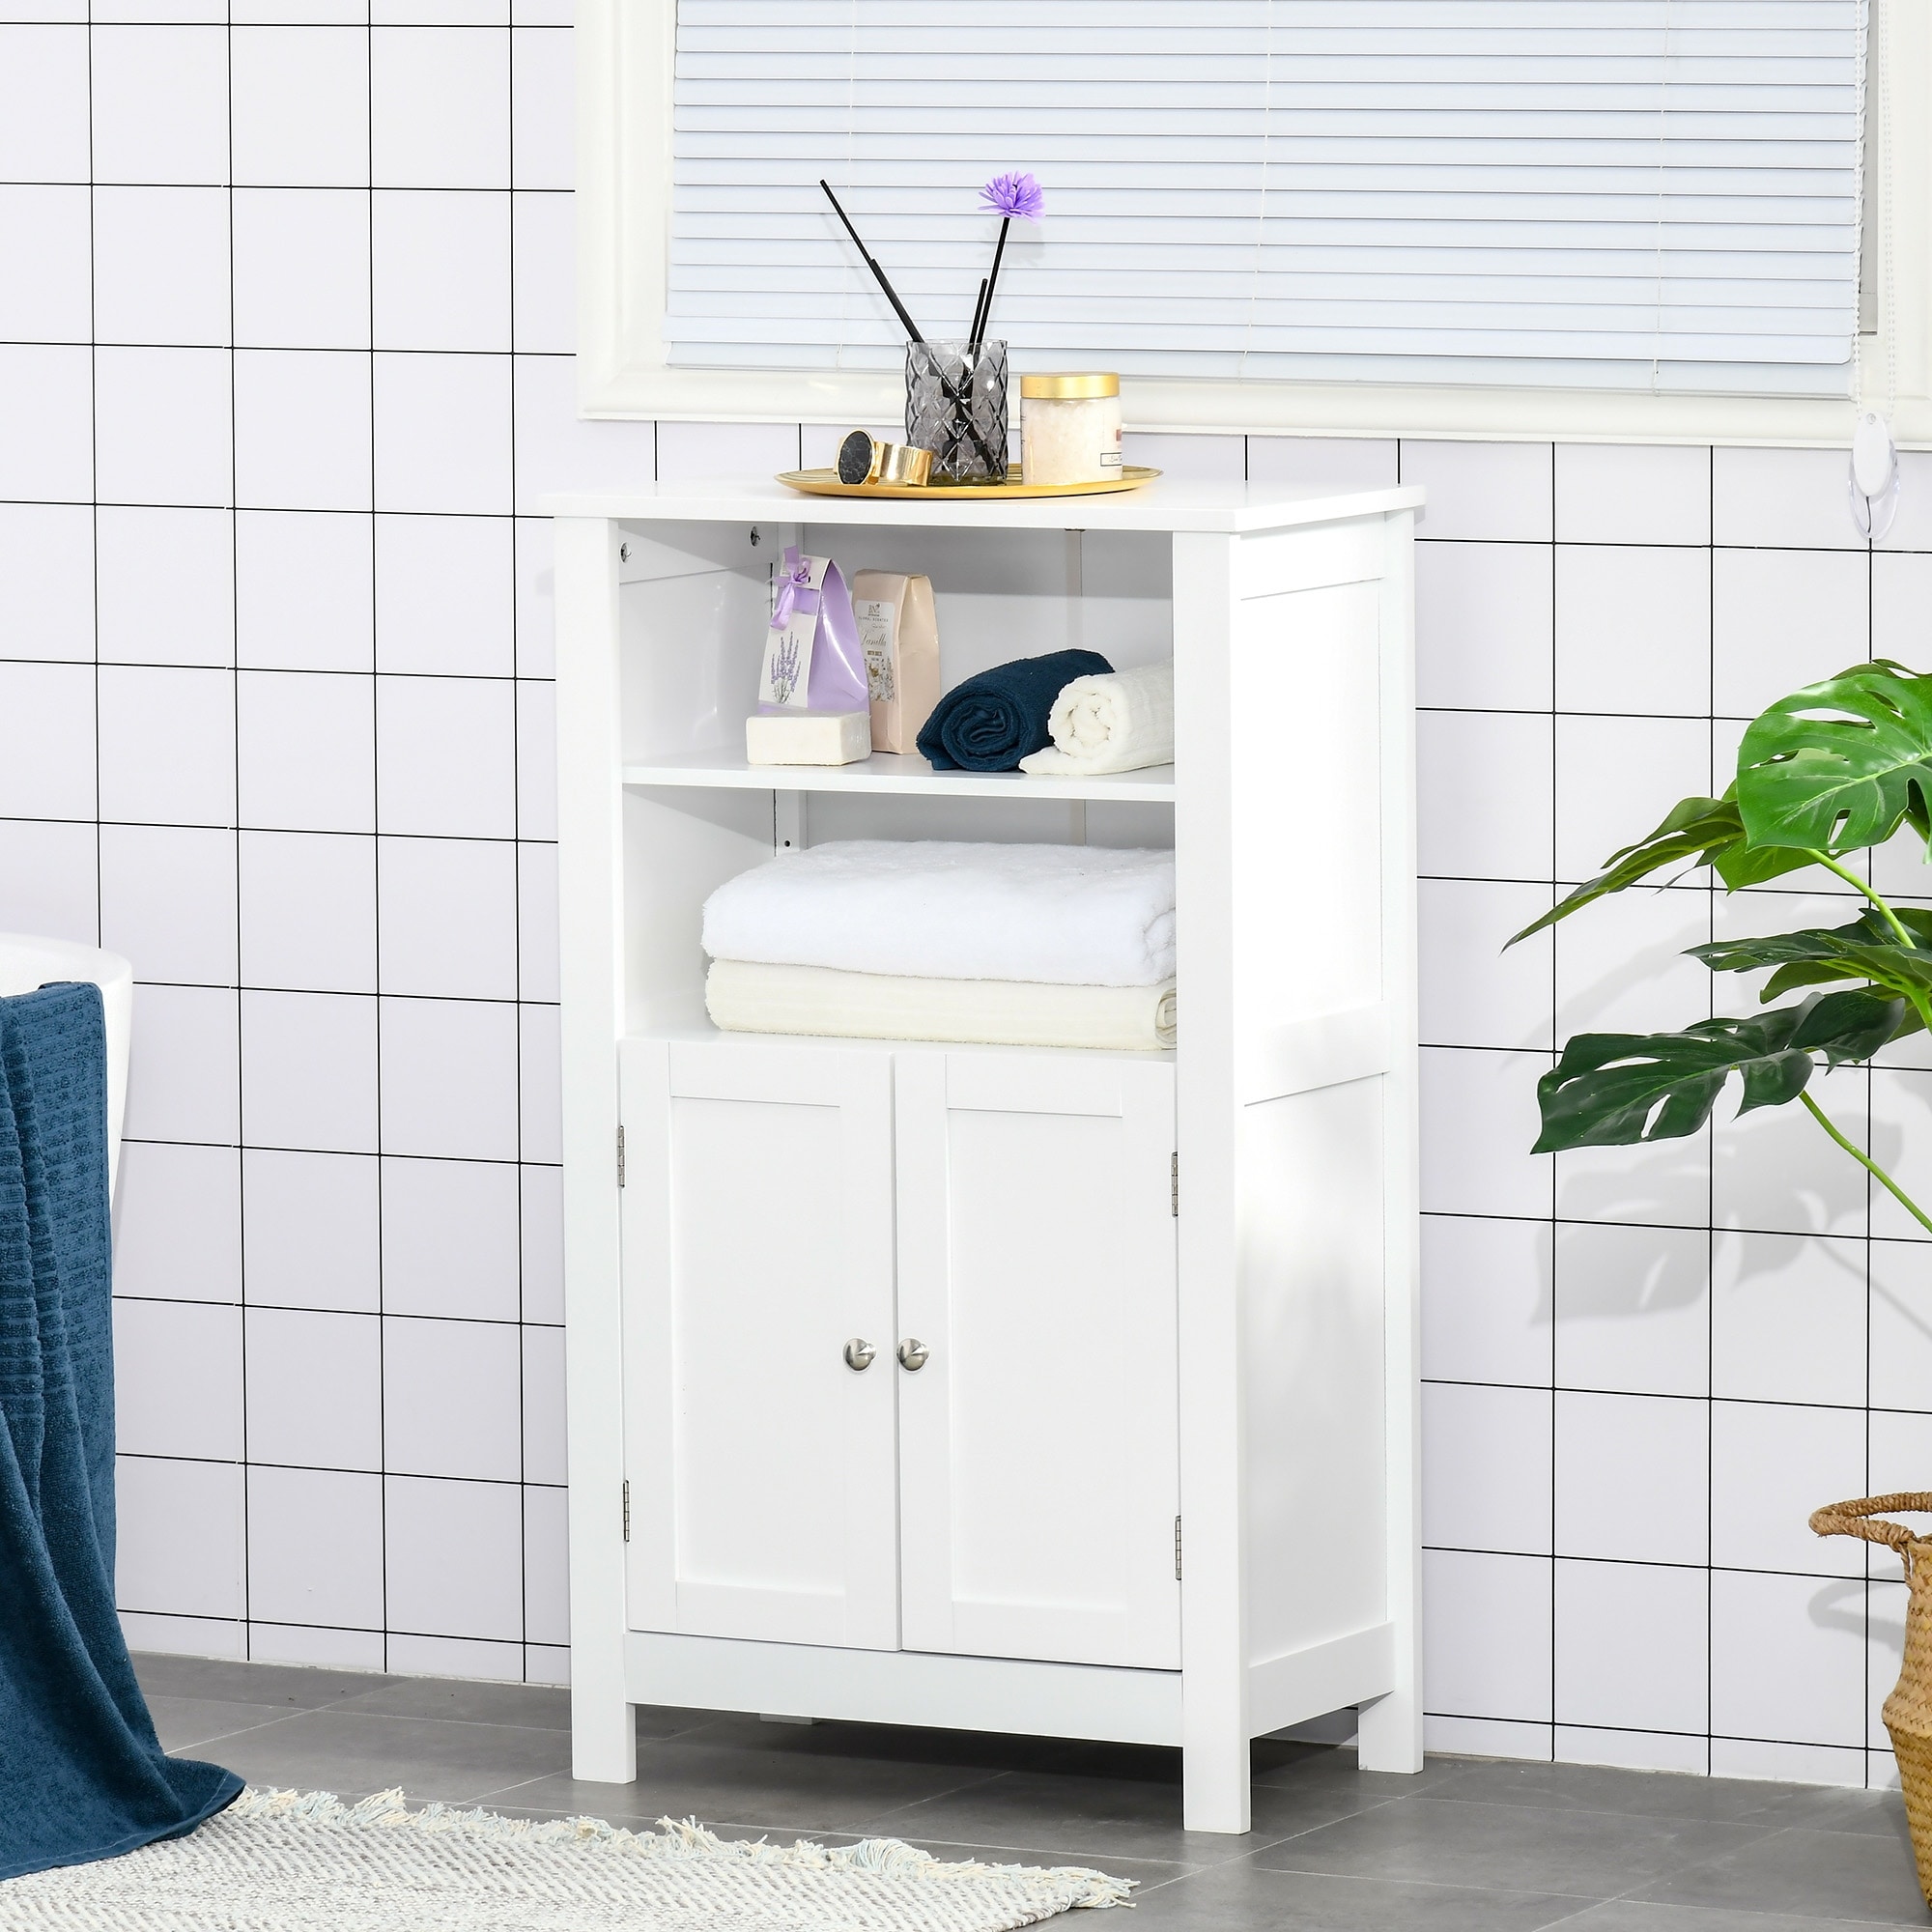 https://ak1.ostkcdn.com/images/products/is/images/direct/10328f8de166833460ae430097ac46534a23a6f7/kleankin-Bathroom-Floor-Storage-Cabinet%2C-Freestanding-Linen-Cabinet-with-Double-Doors-and-2-Adjustable-Shelves%2C-White.jpg